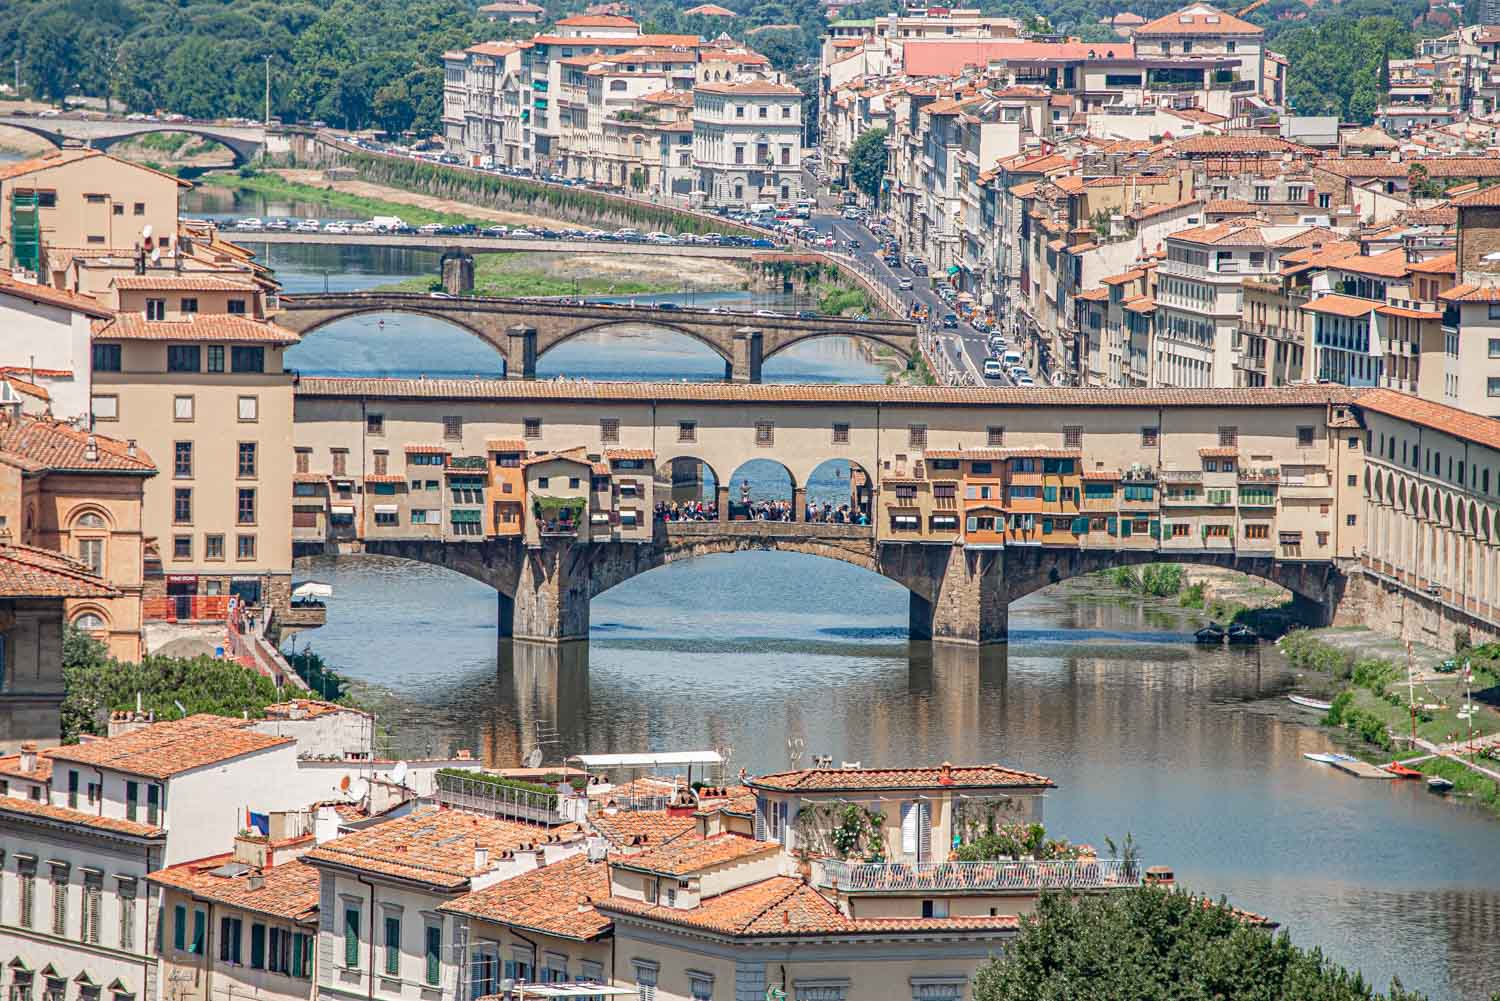 Where to stay in Florence - Cheap Airbnbs